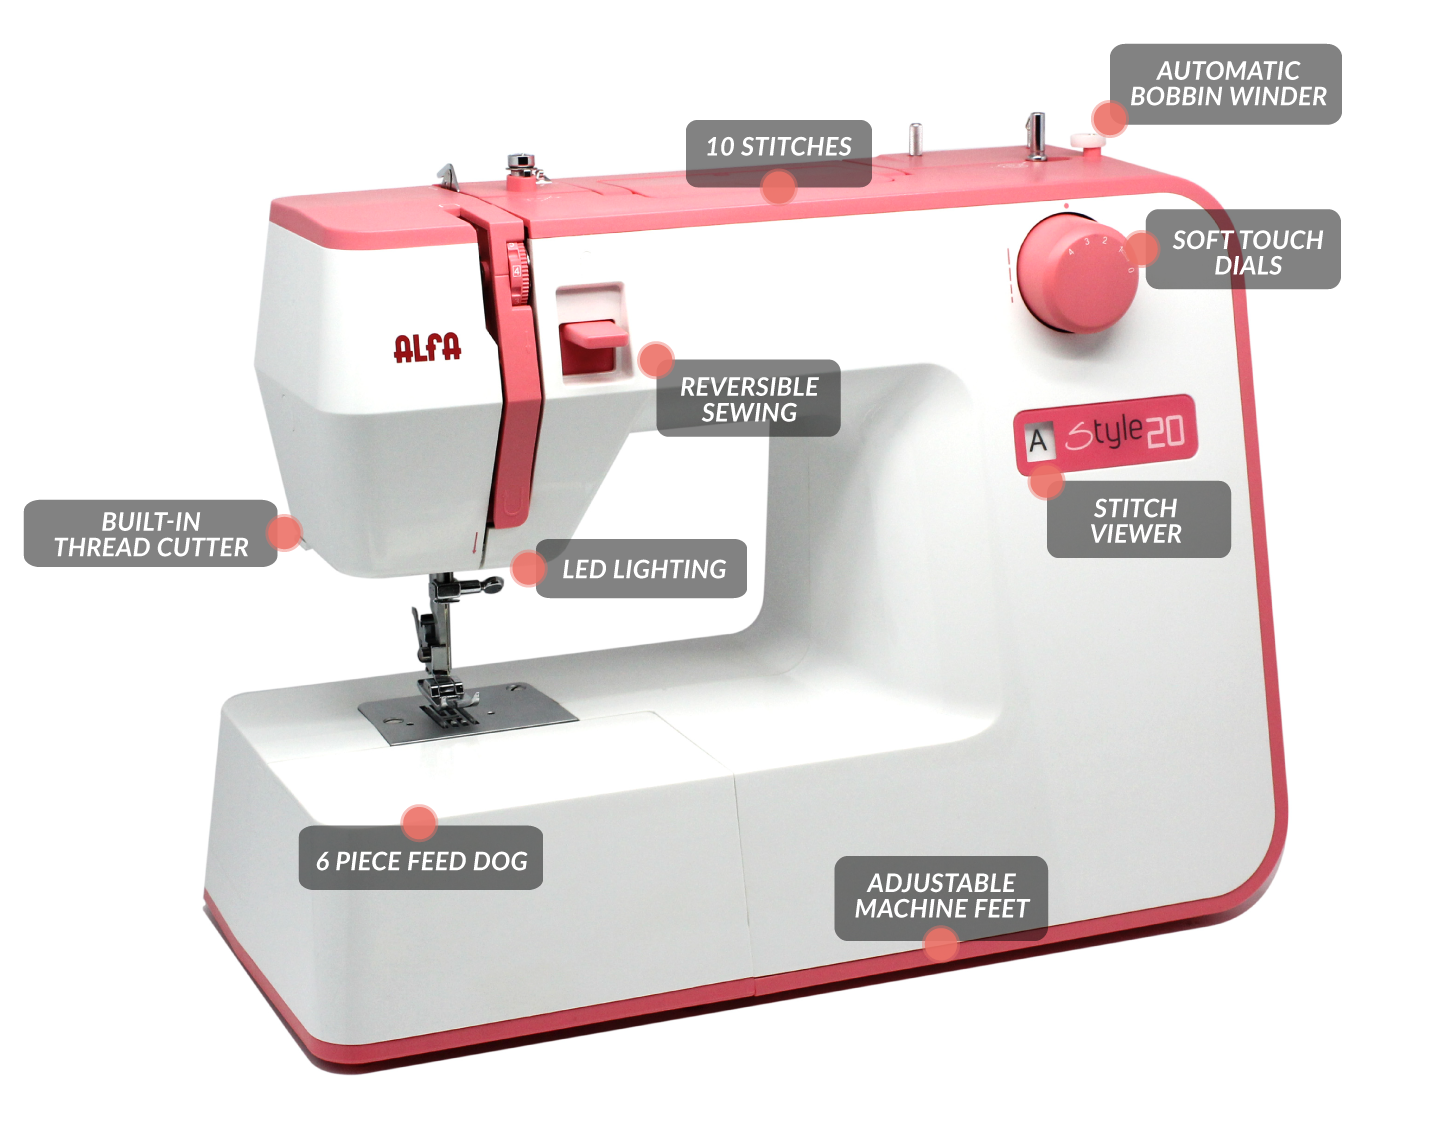 Echidna Sewing Alfa Style 20 machine features